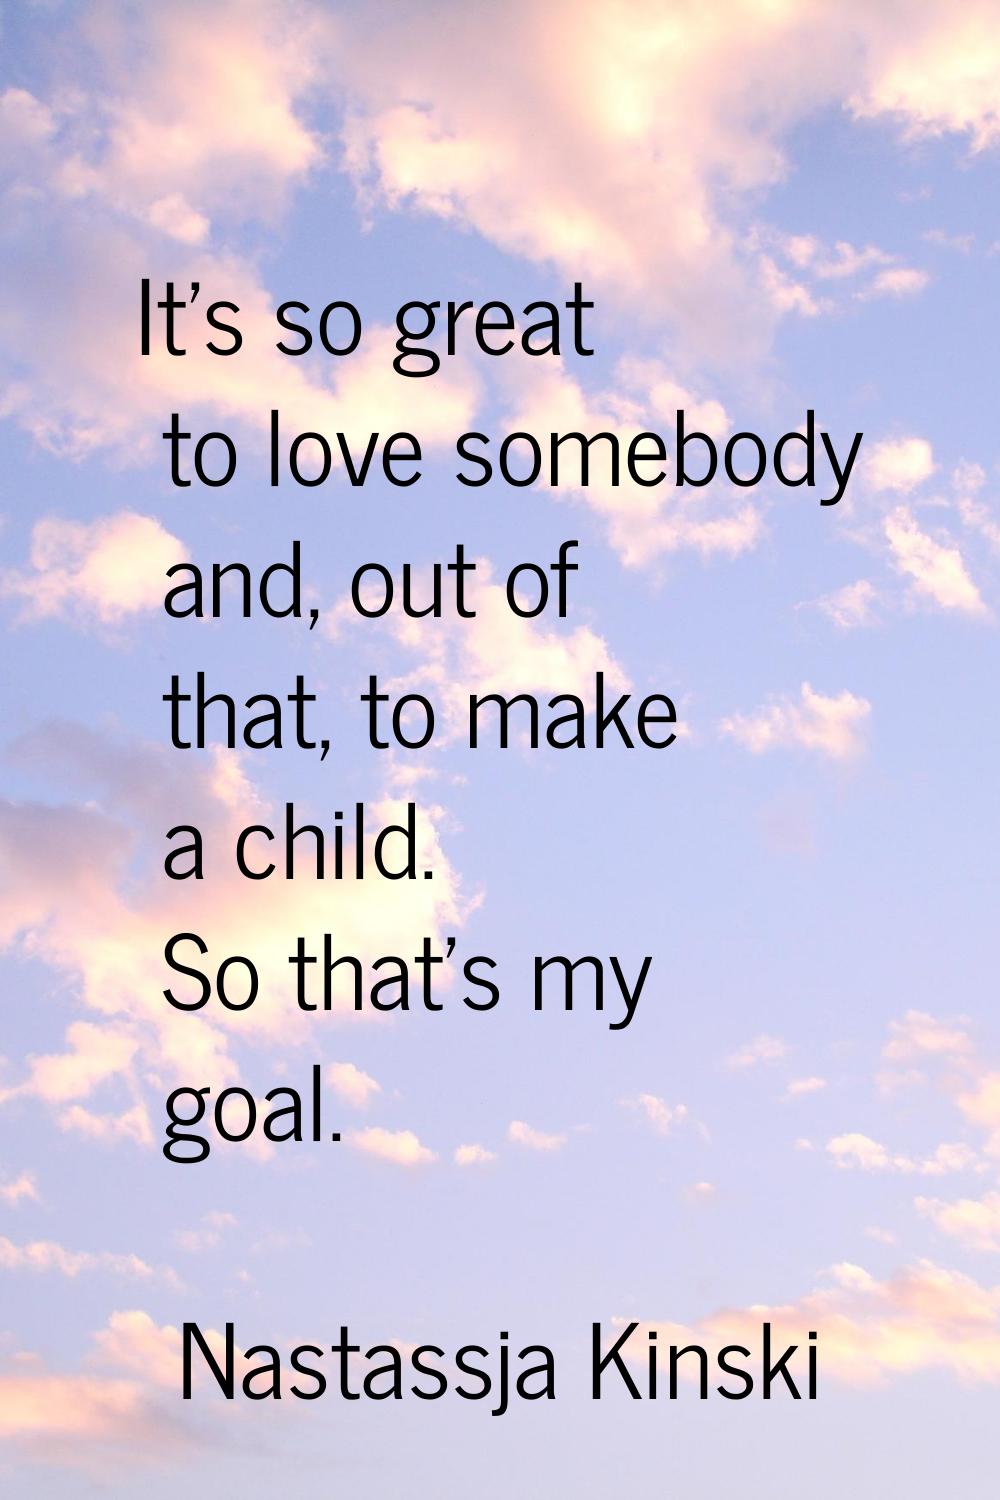 It's so great to love somebody and, out of that, to make a child. So that's my goal.